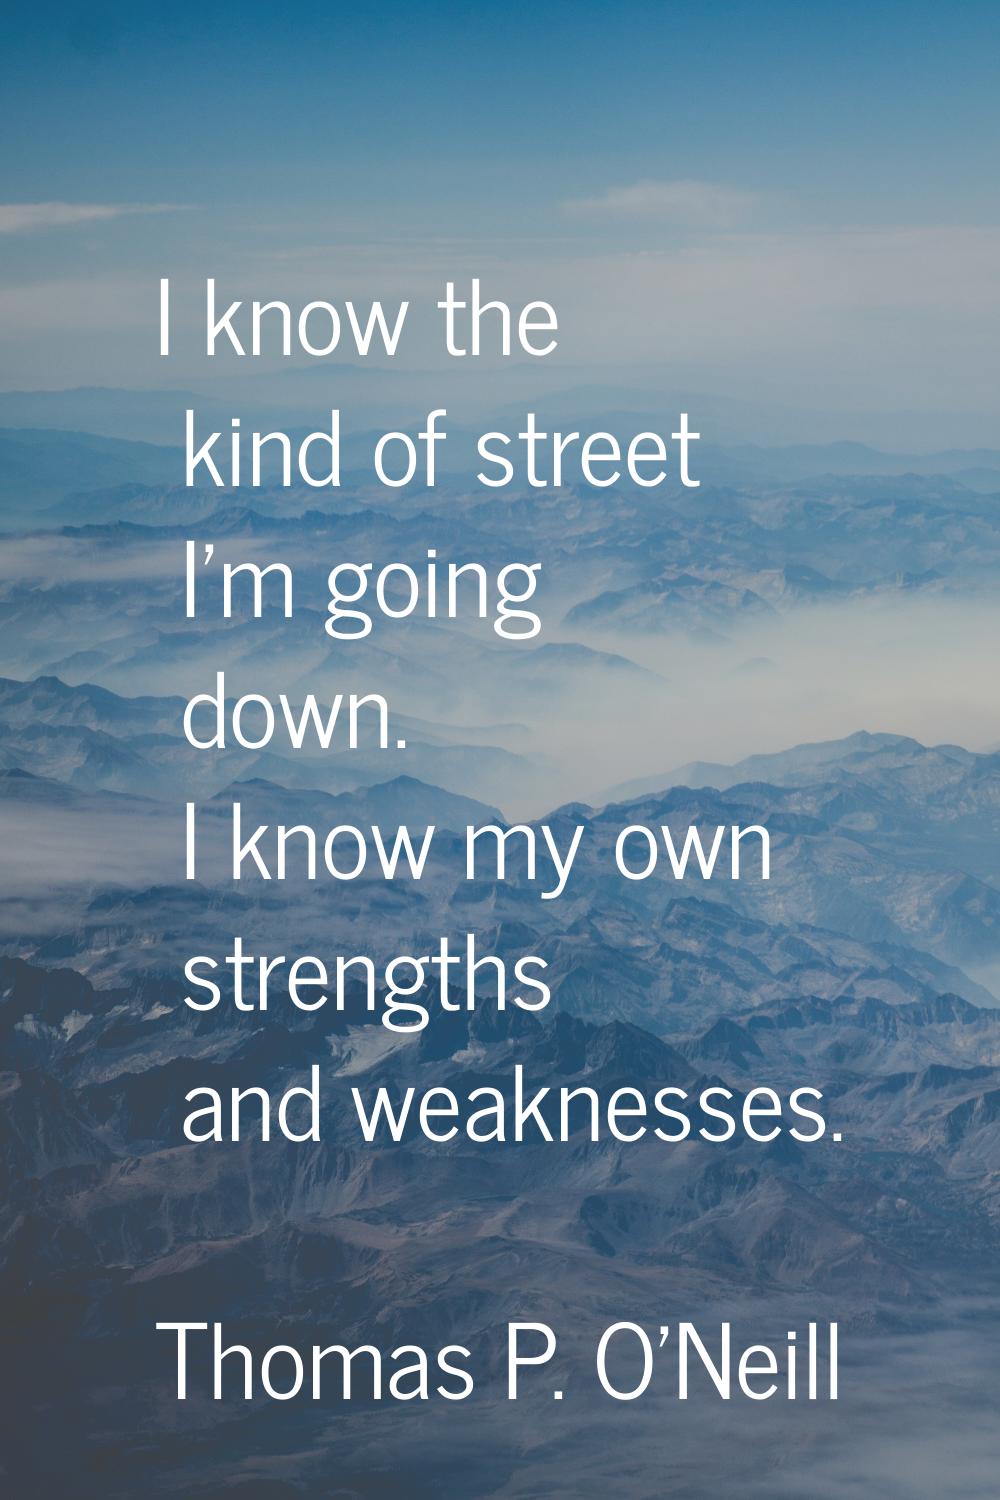 I know the kind of street I'm going down. I know my own strengths and weaknesses.